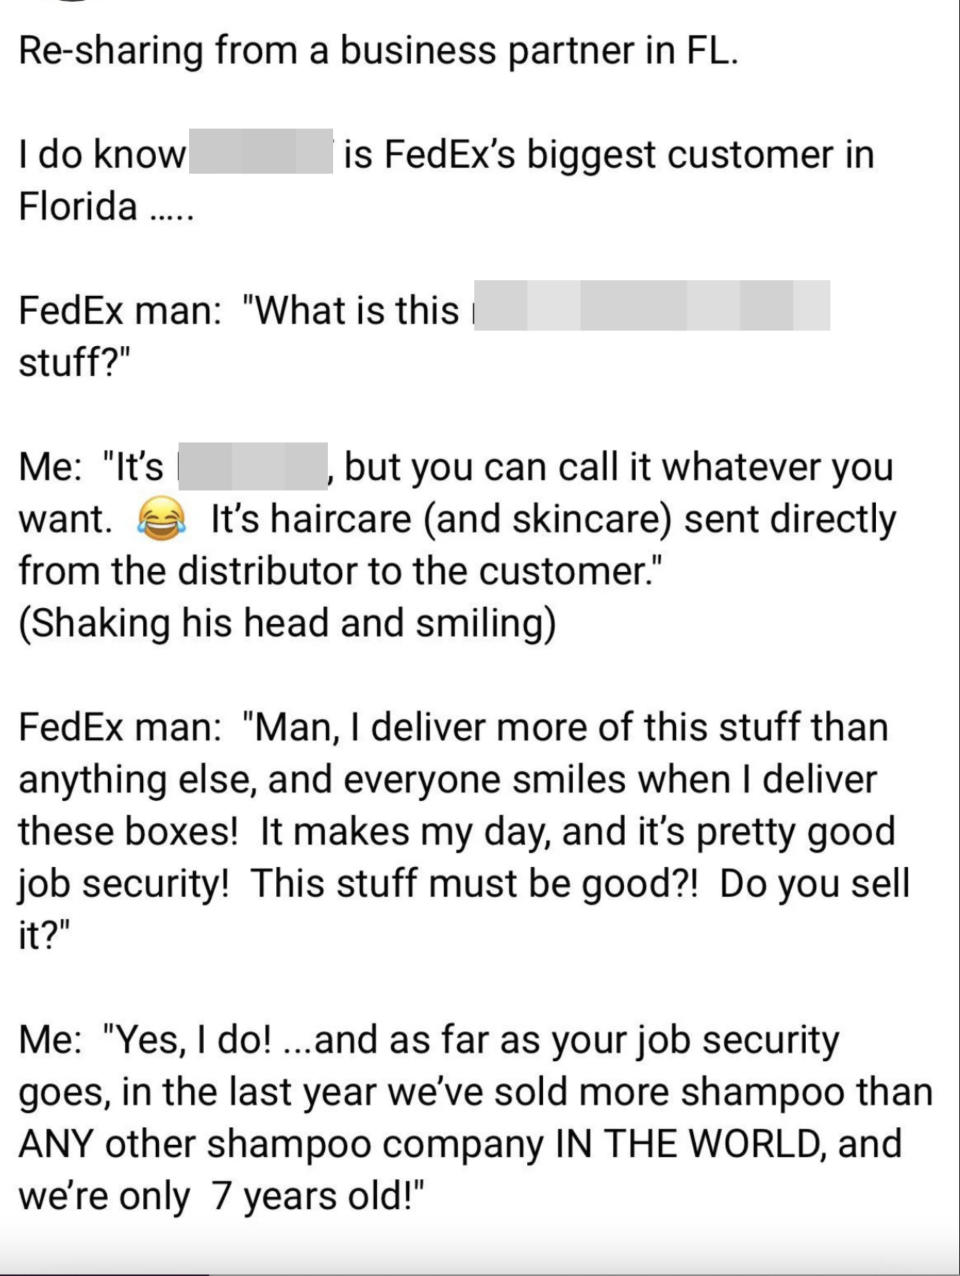 A person talking about the brand they sell and claiming a FedEx driver said they deliver more of it than anything else and that it always makes people happy, so must be good